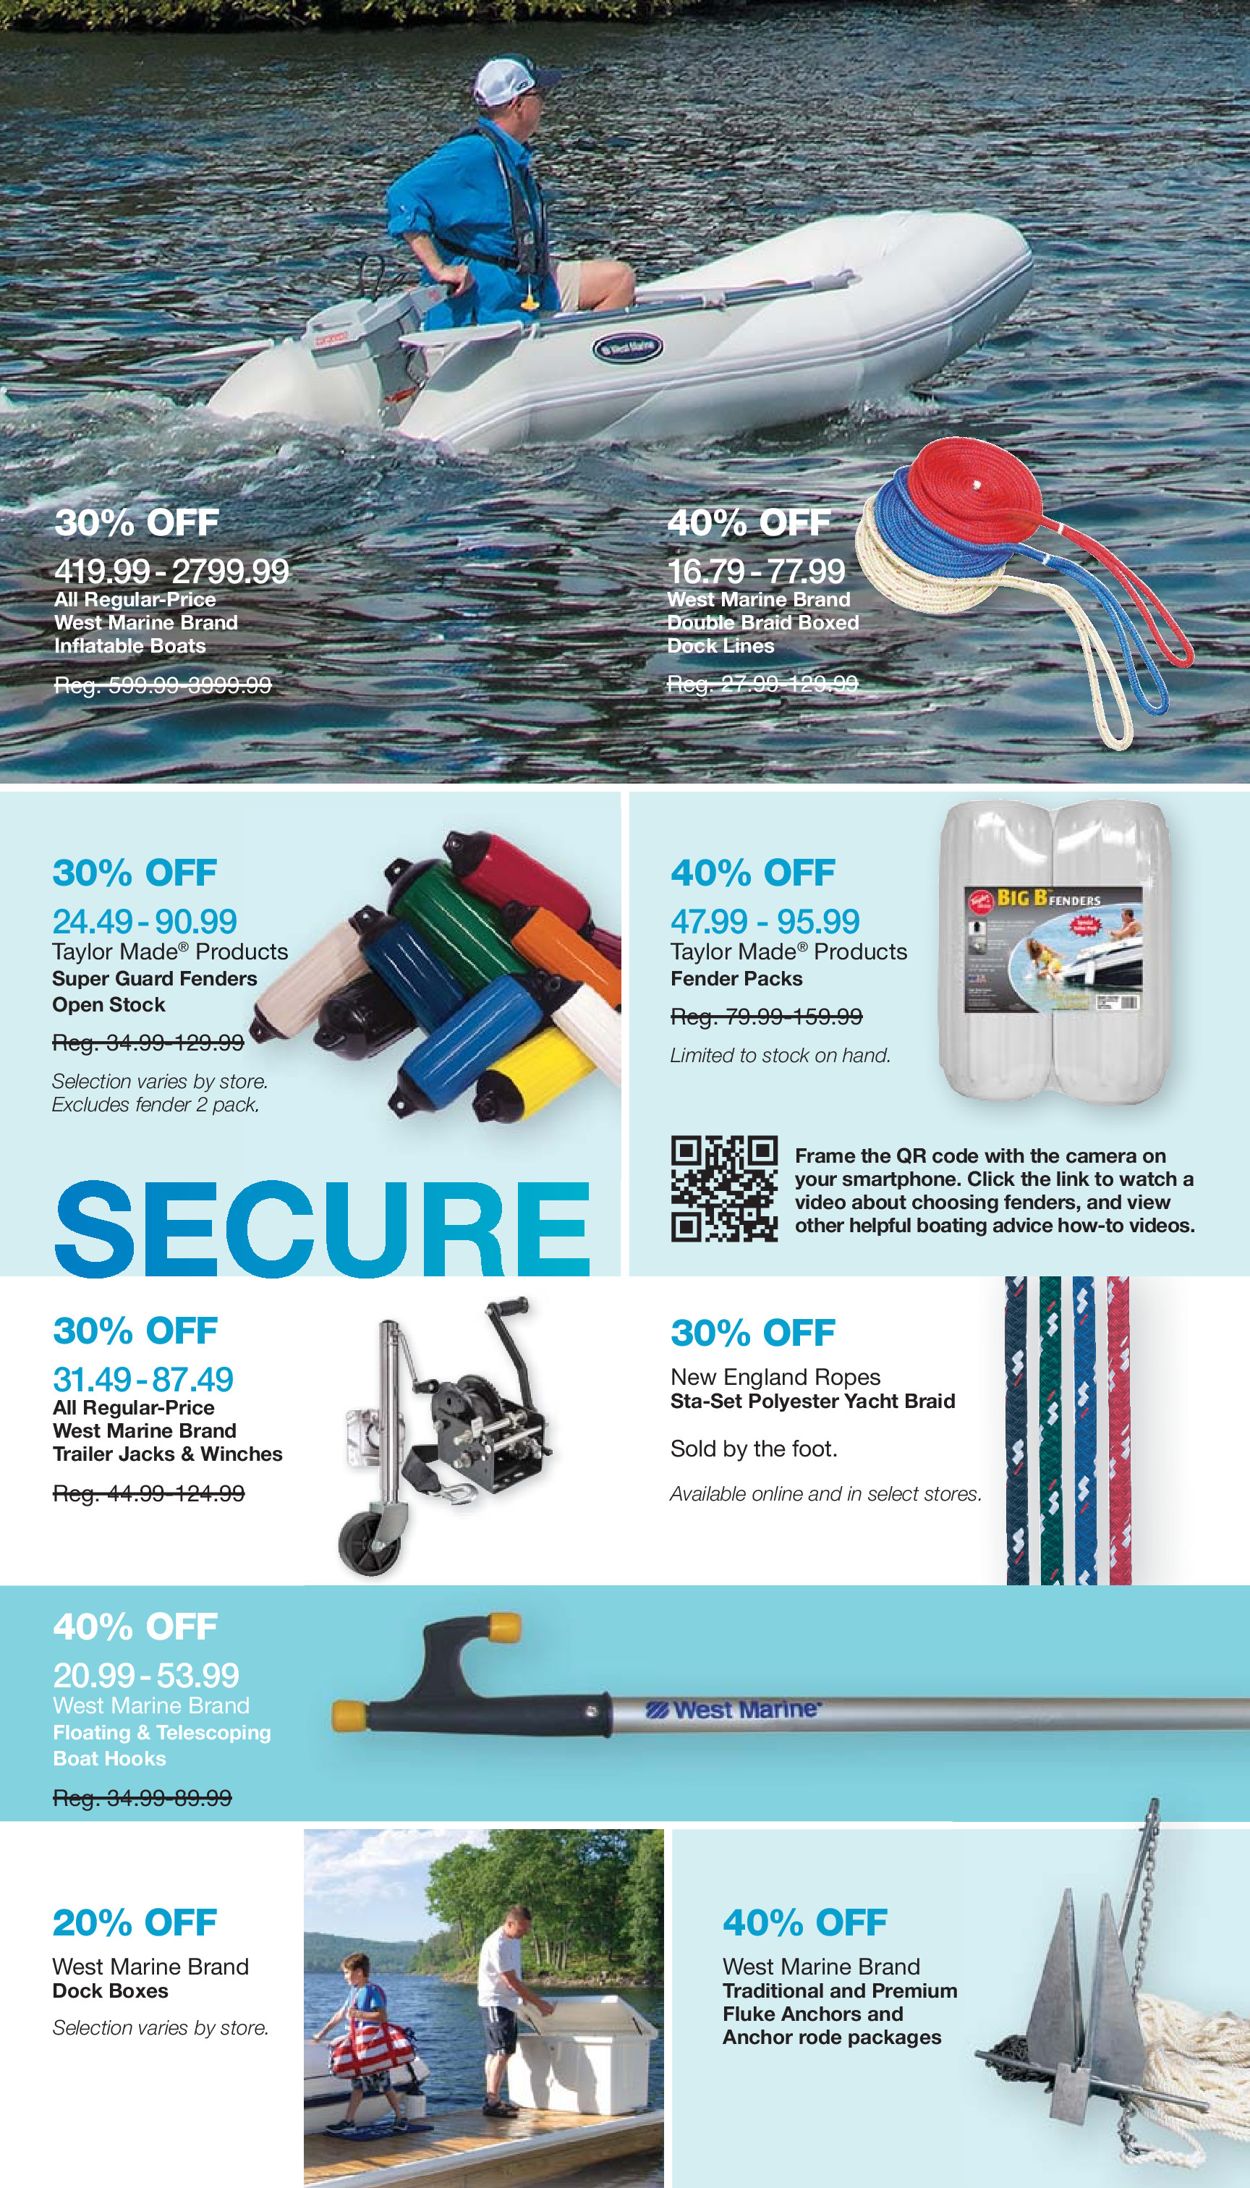 West Marine Current weekly ad 05/21 05/31/2020 [5]